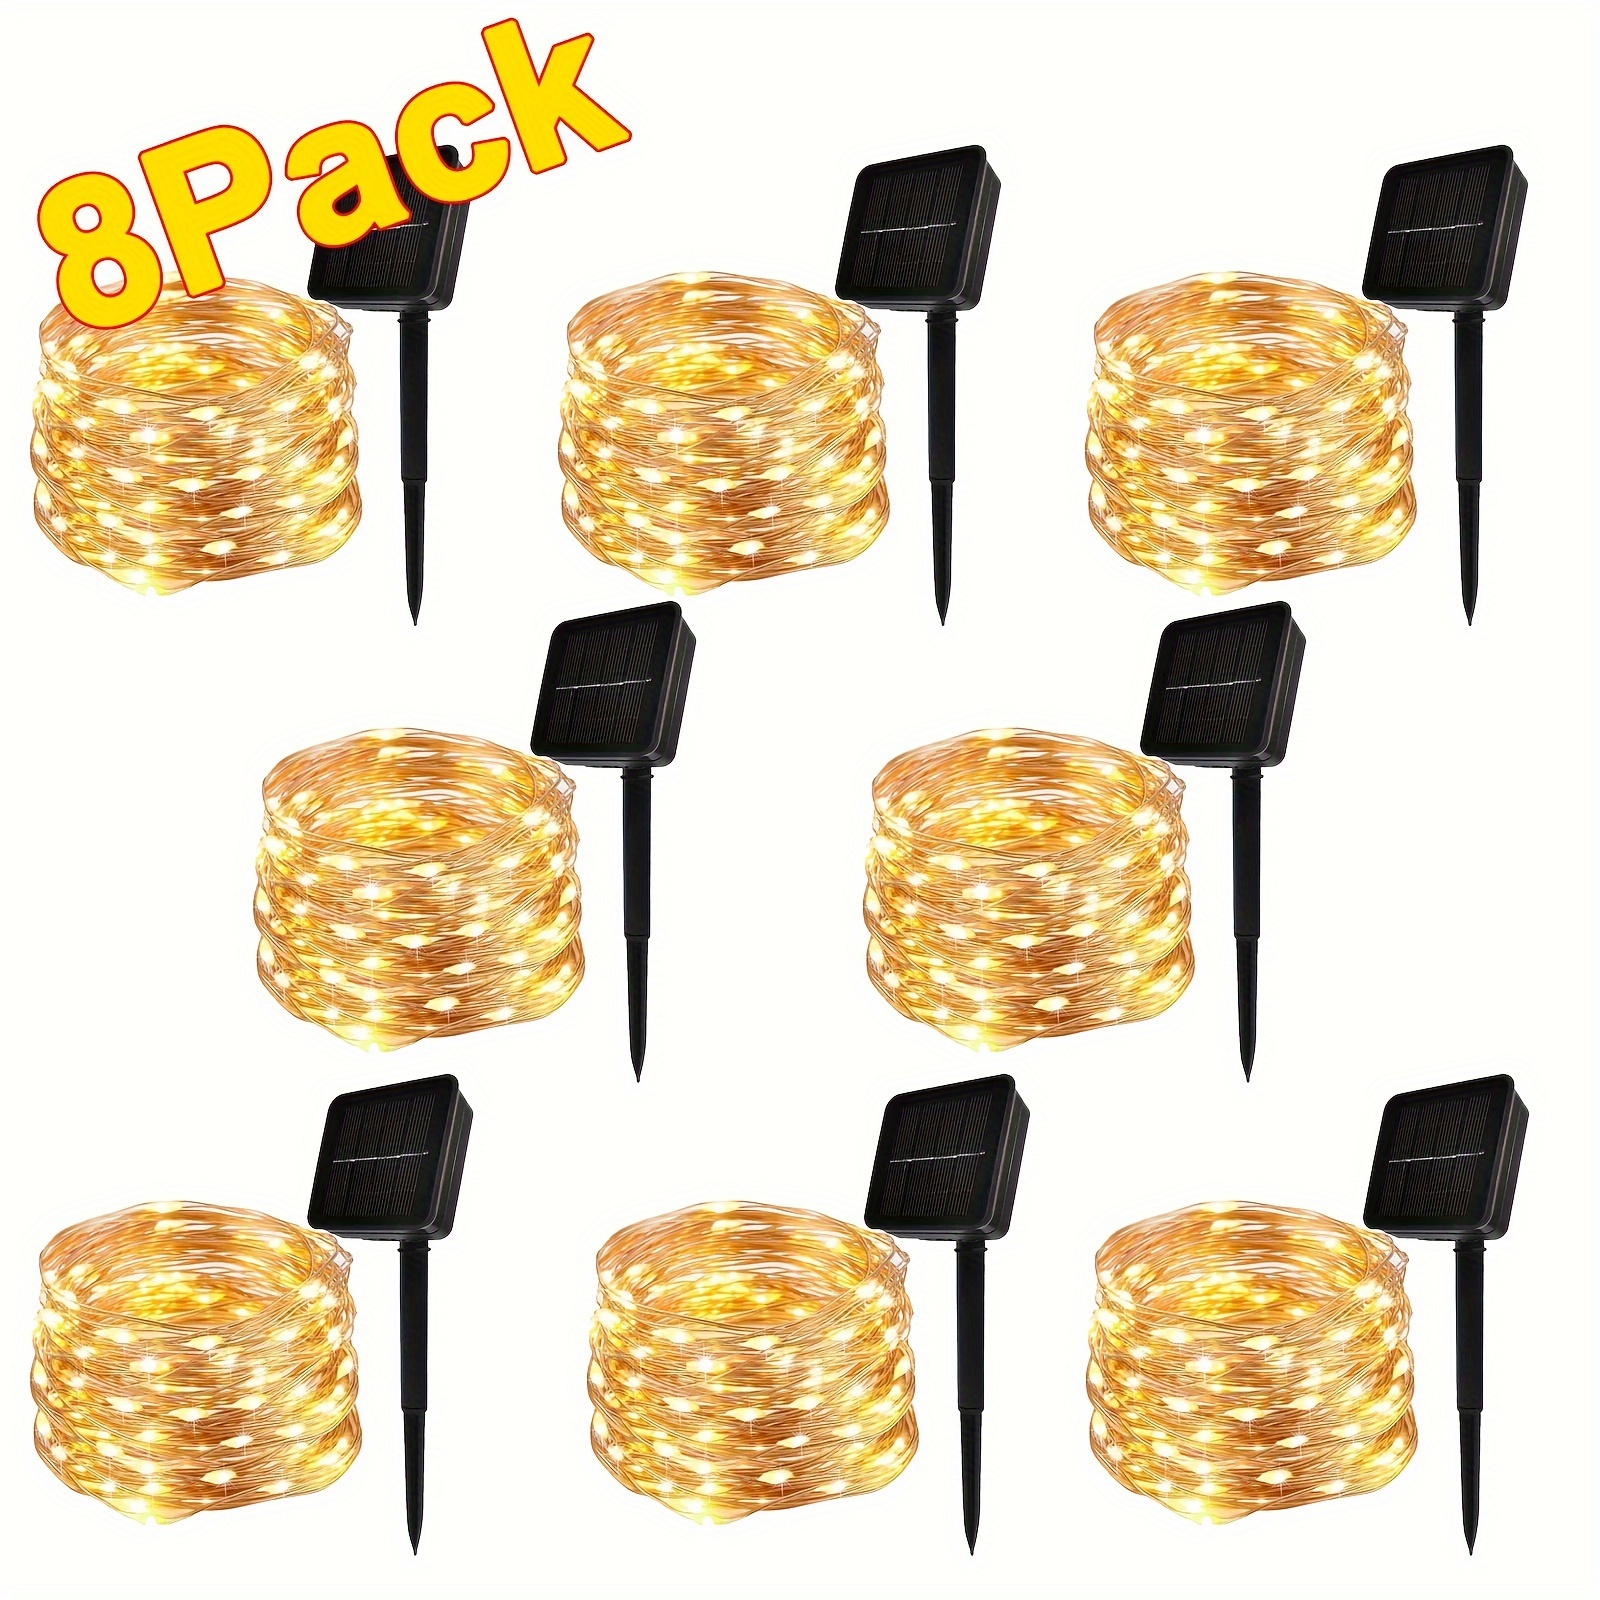 

8-pack 800 Led Solar String Lights Outdoor, Solar Powered Ip65 Waterproof Solar Fairy Lights With 8 Modes, Copper Wire Solar Twinkle Lights For Tree Wedding Party Garden Patio Decorations